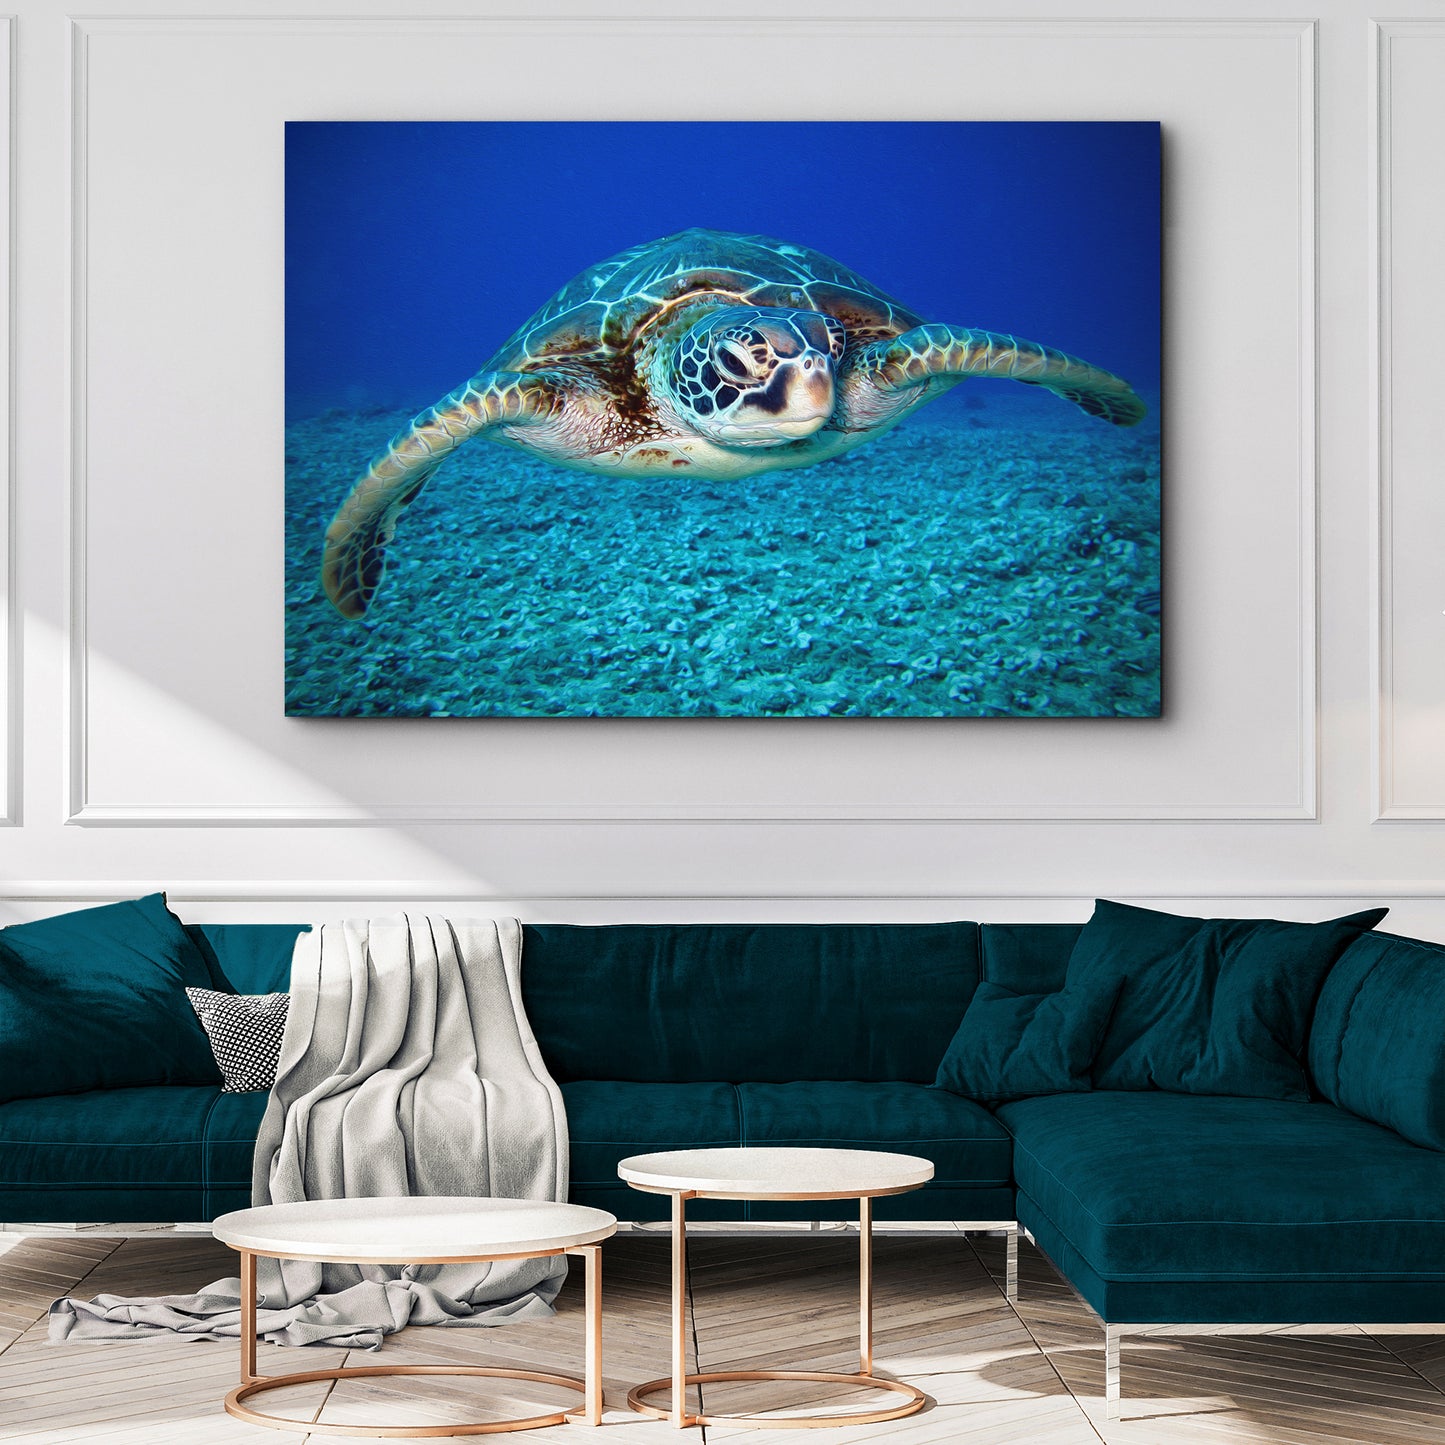 Green Sea Turtle Canvas Wall Art - Image by Tailored Canvases